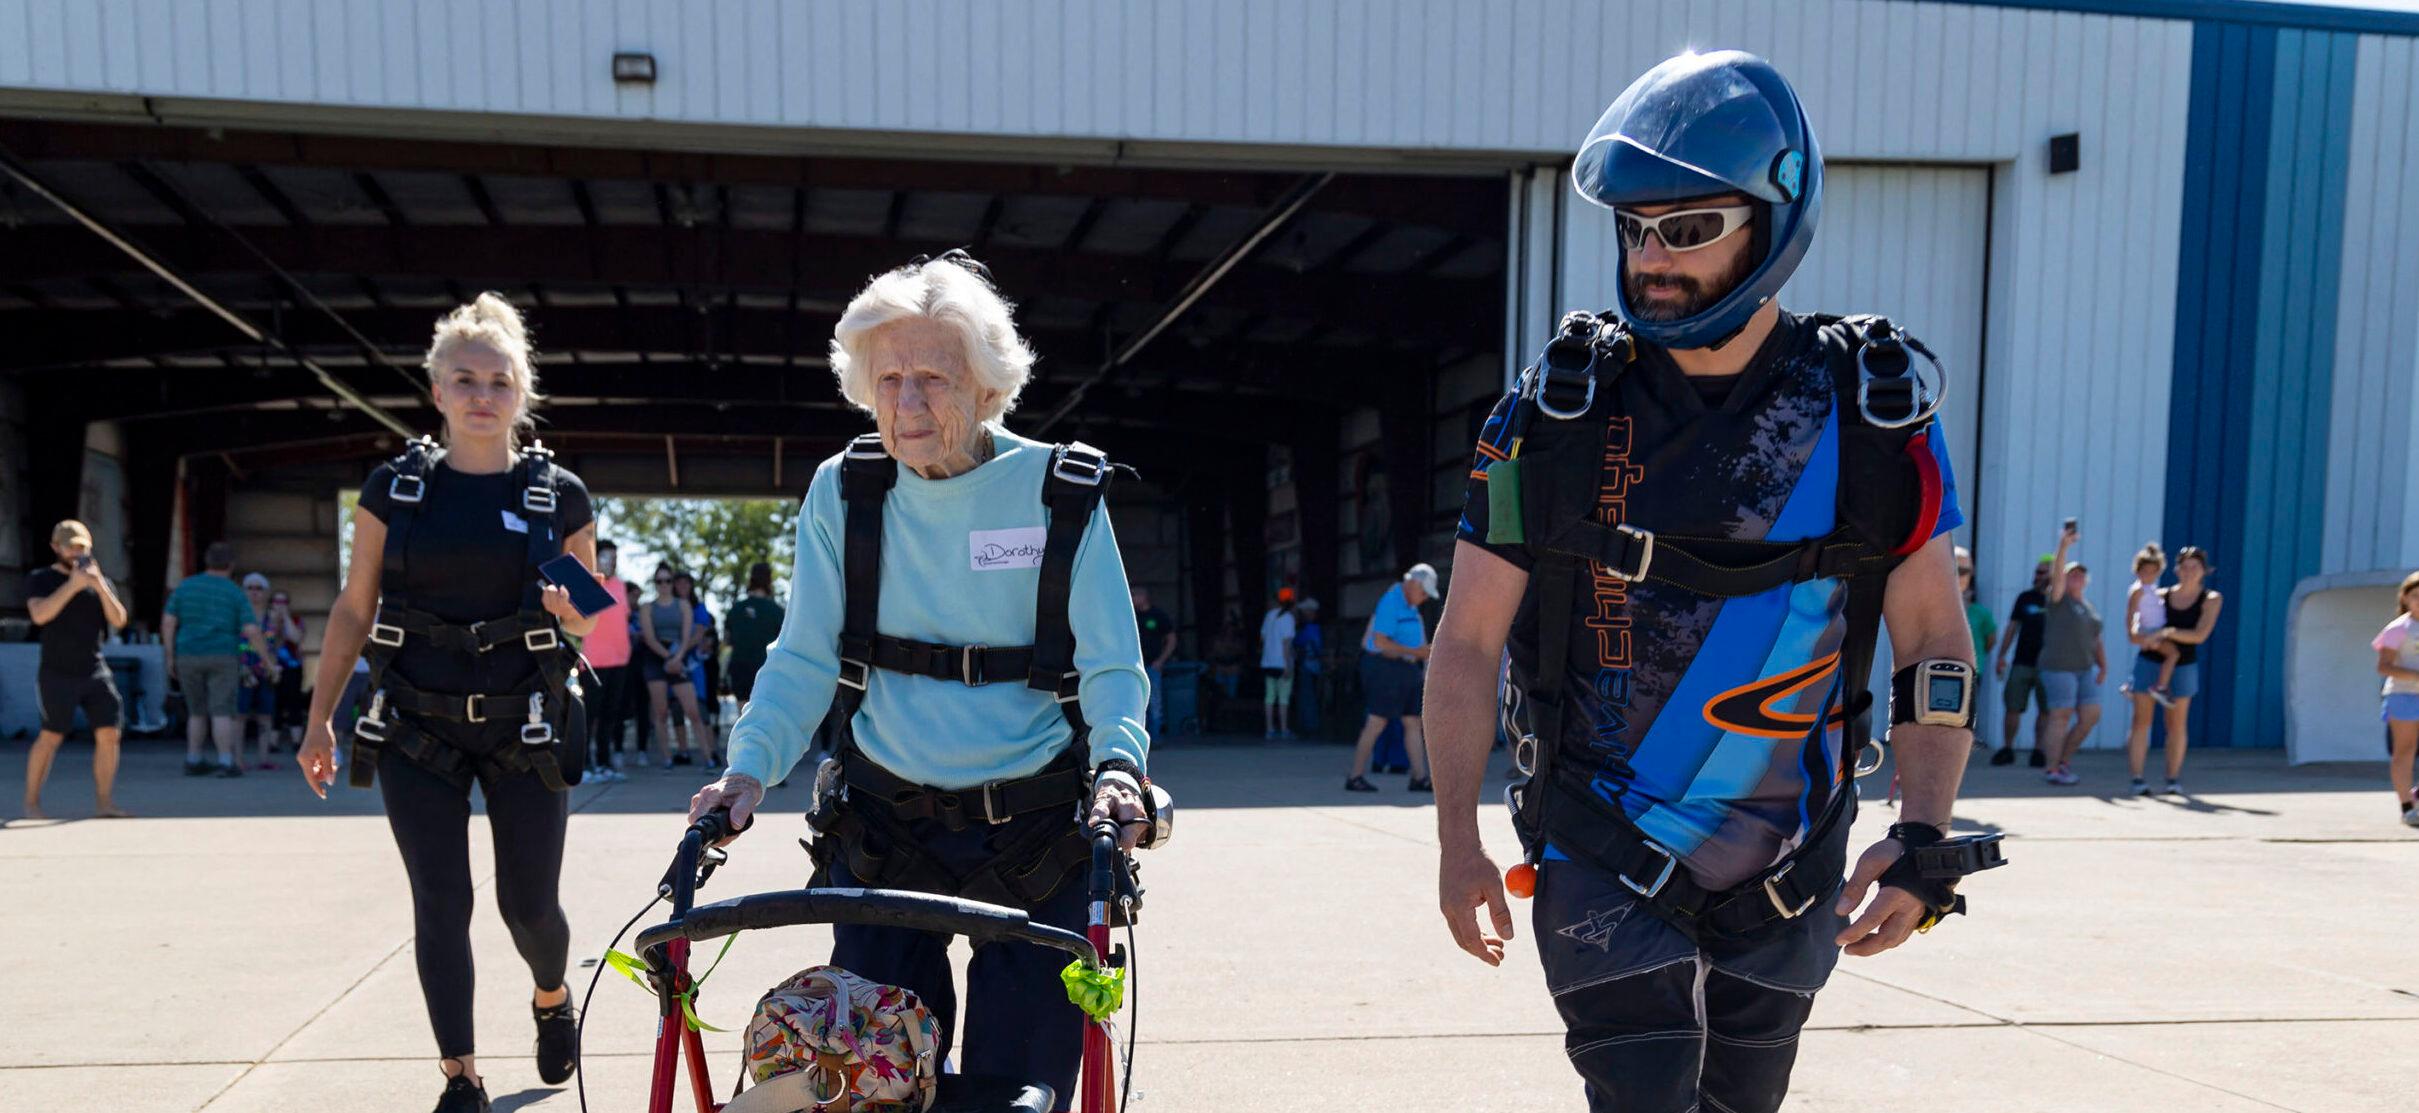 104-Year-Old Woman Passes Away After Setting Skydiving Record